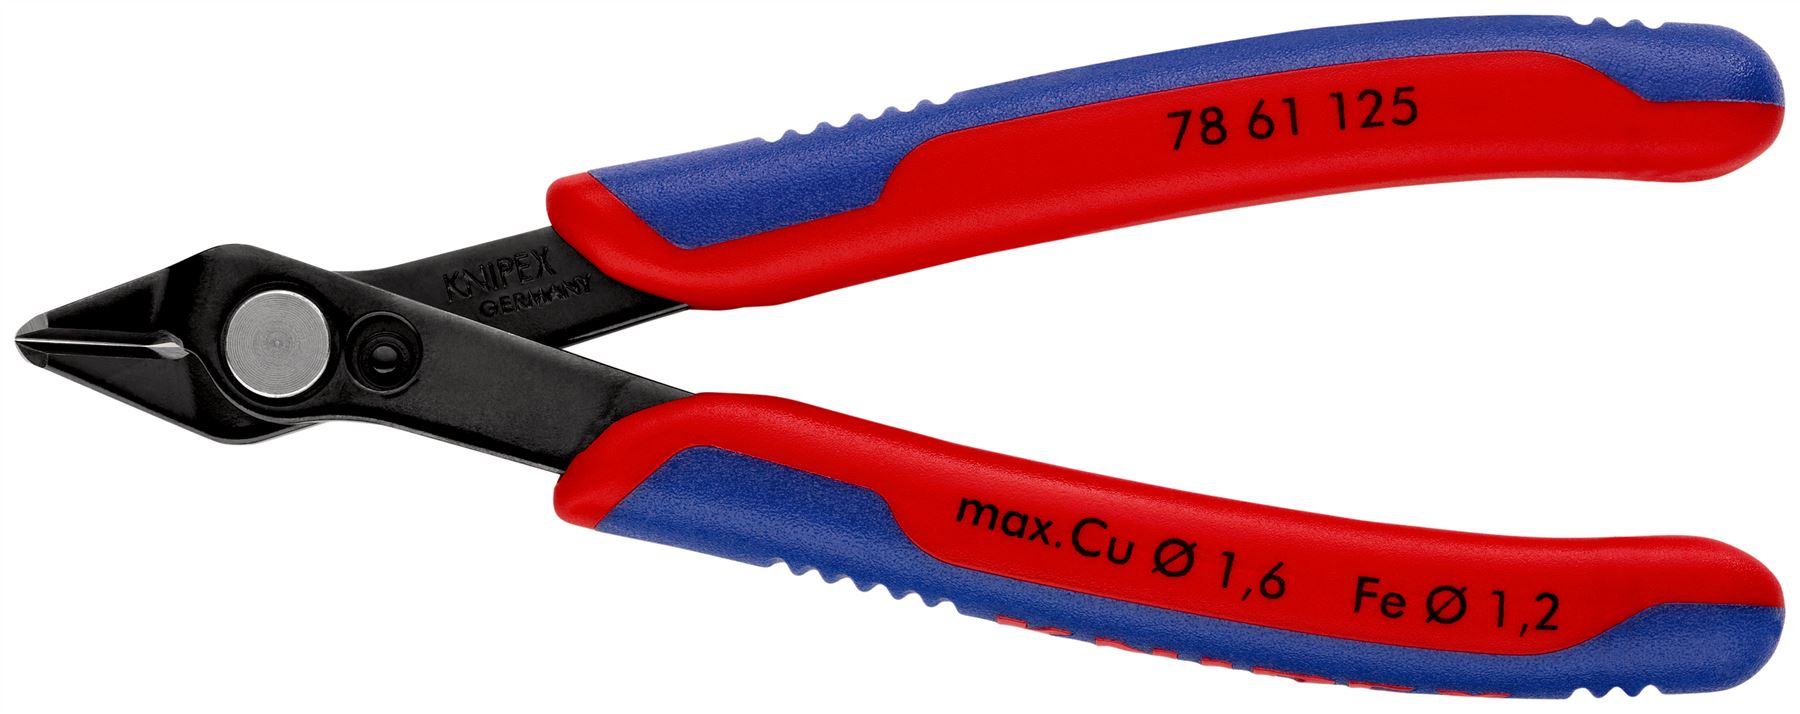 Knipex Electronic Super Knips® 125mm Fine Wire Cutting Pliers 78 61 125